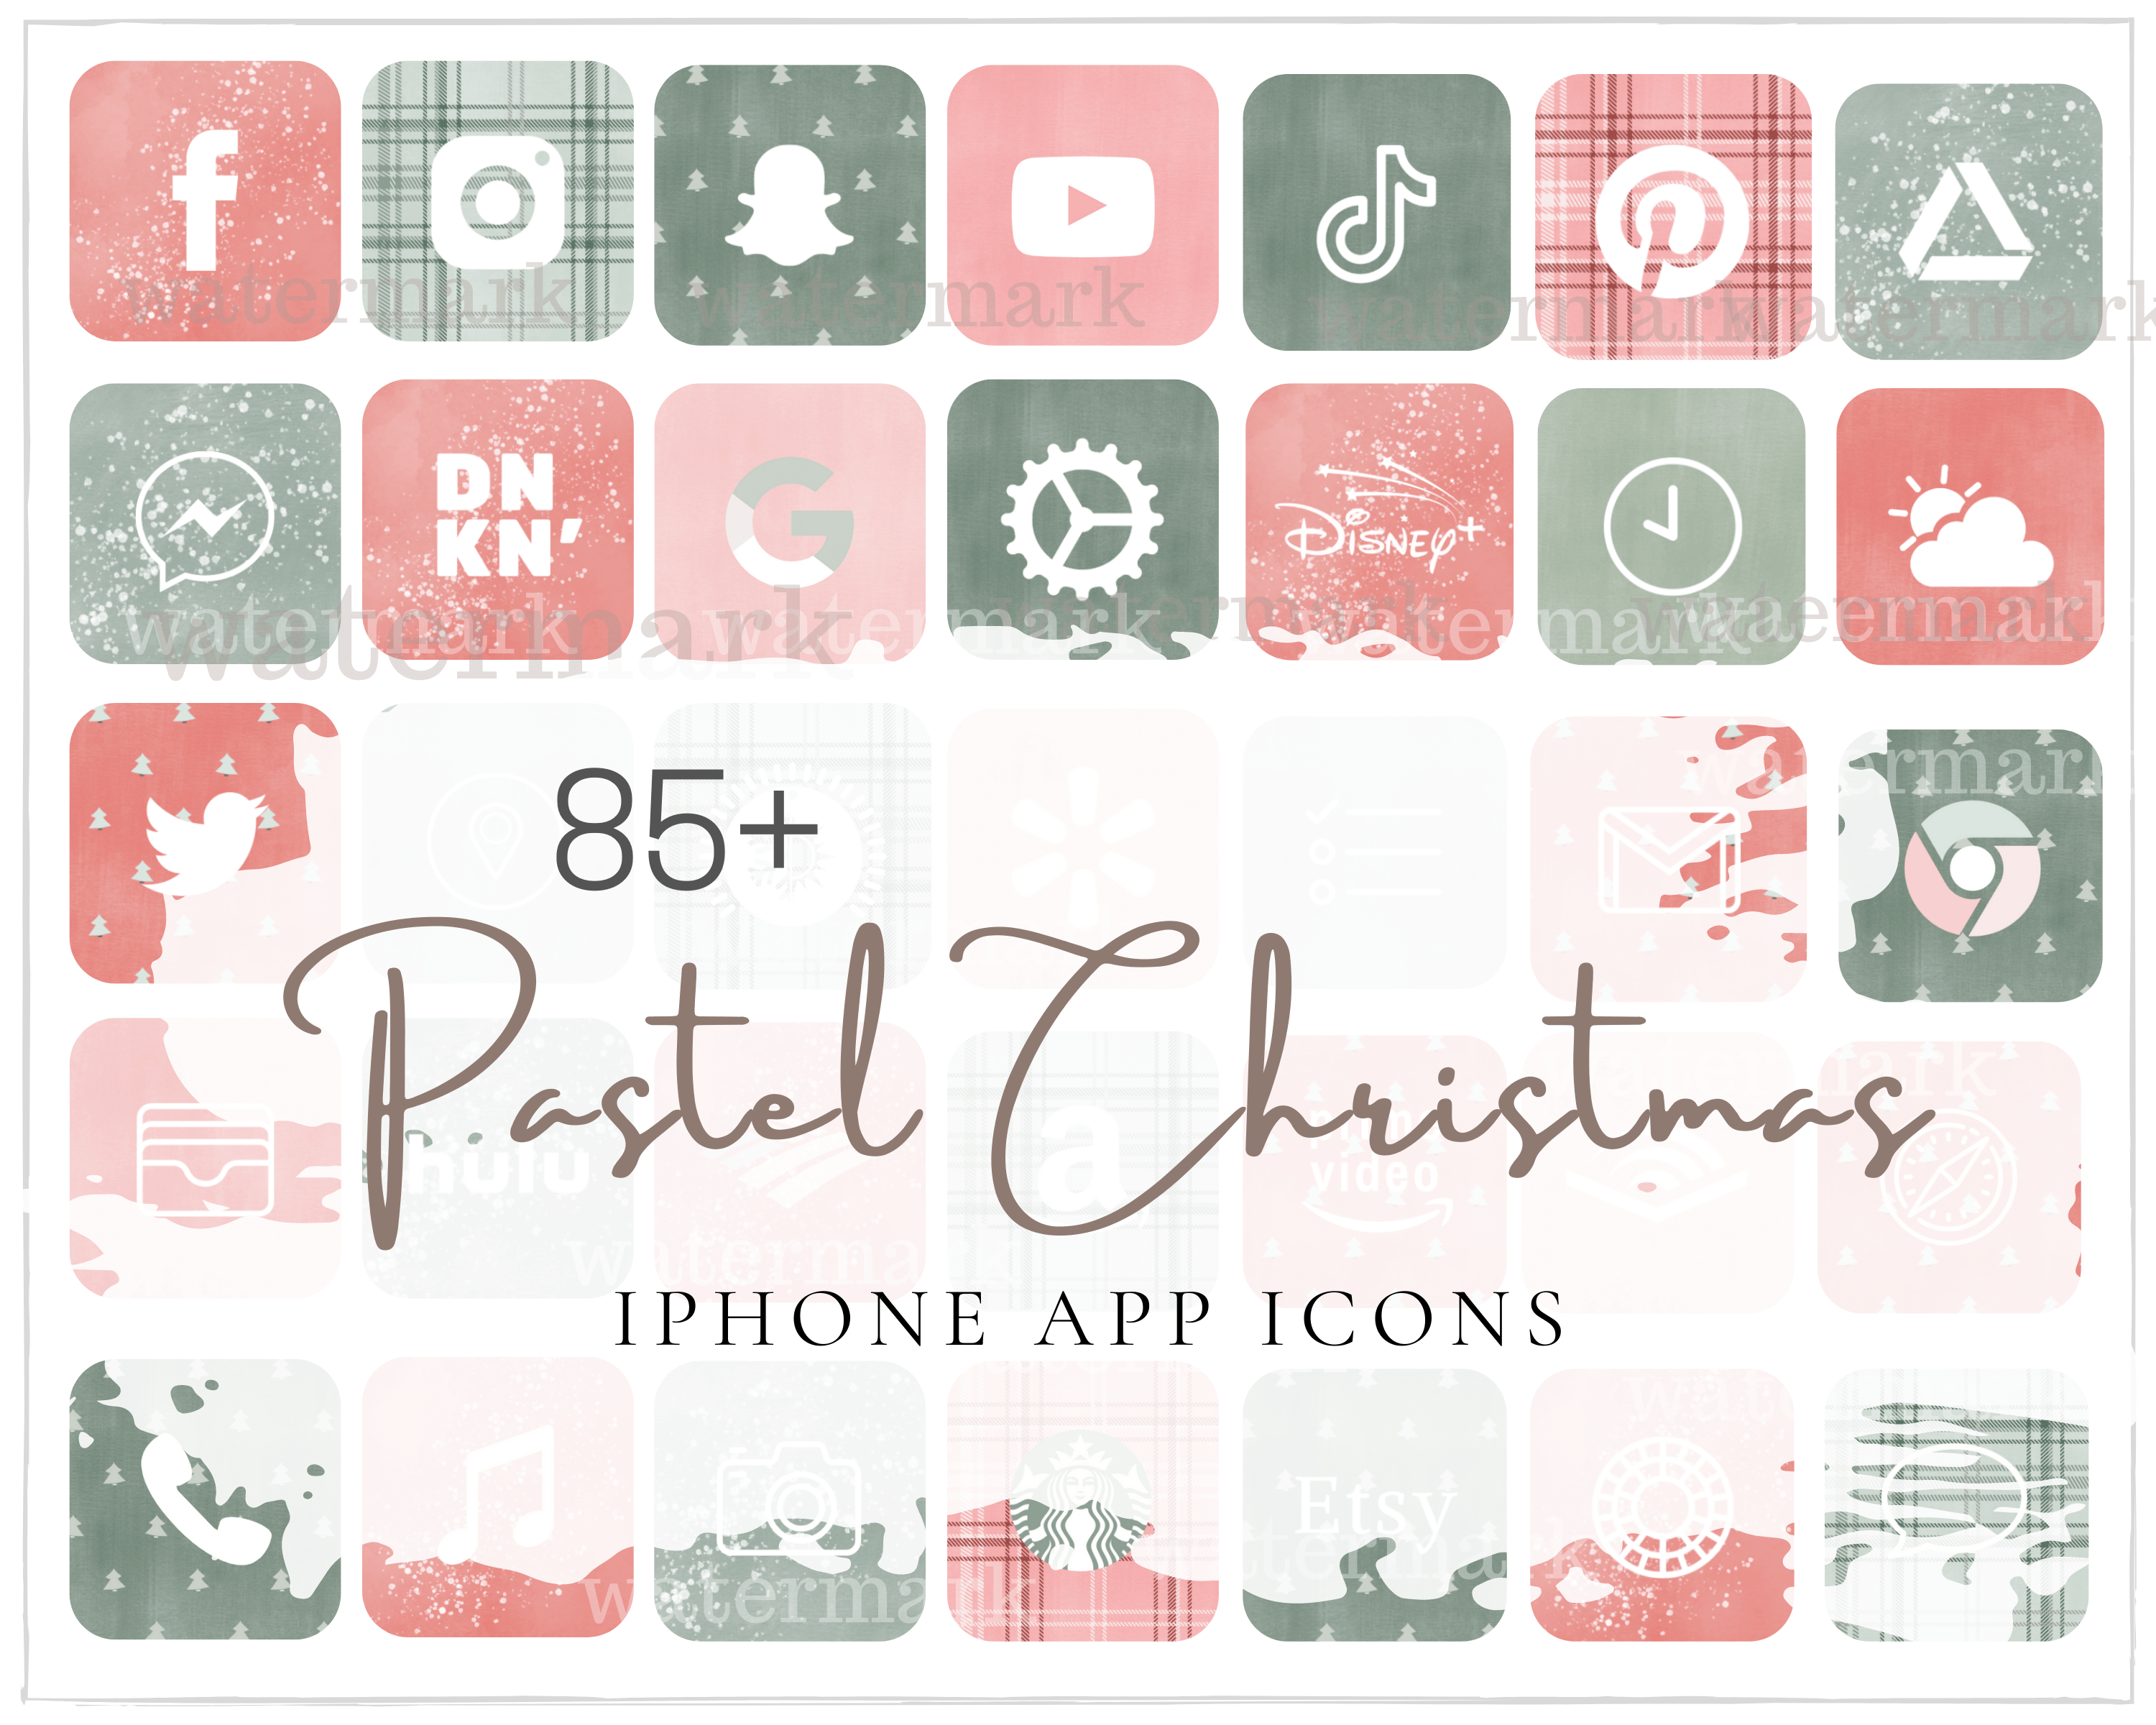 aesthetic ios 14 apps. iphone app icons. christmas aesthetic. christmas iphone home screen. iphone app icons. pastel aesthetic.